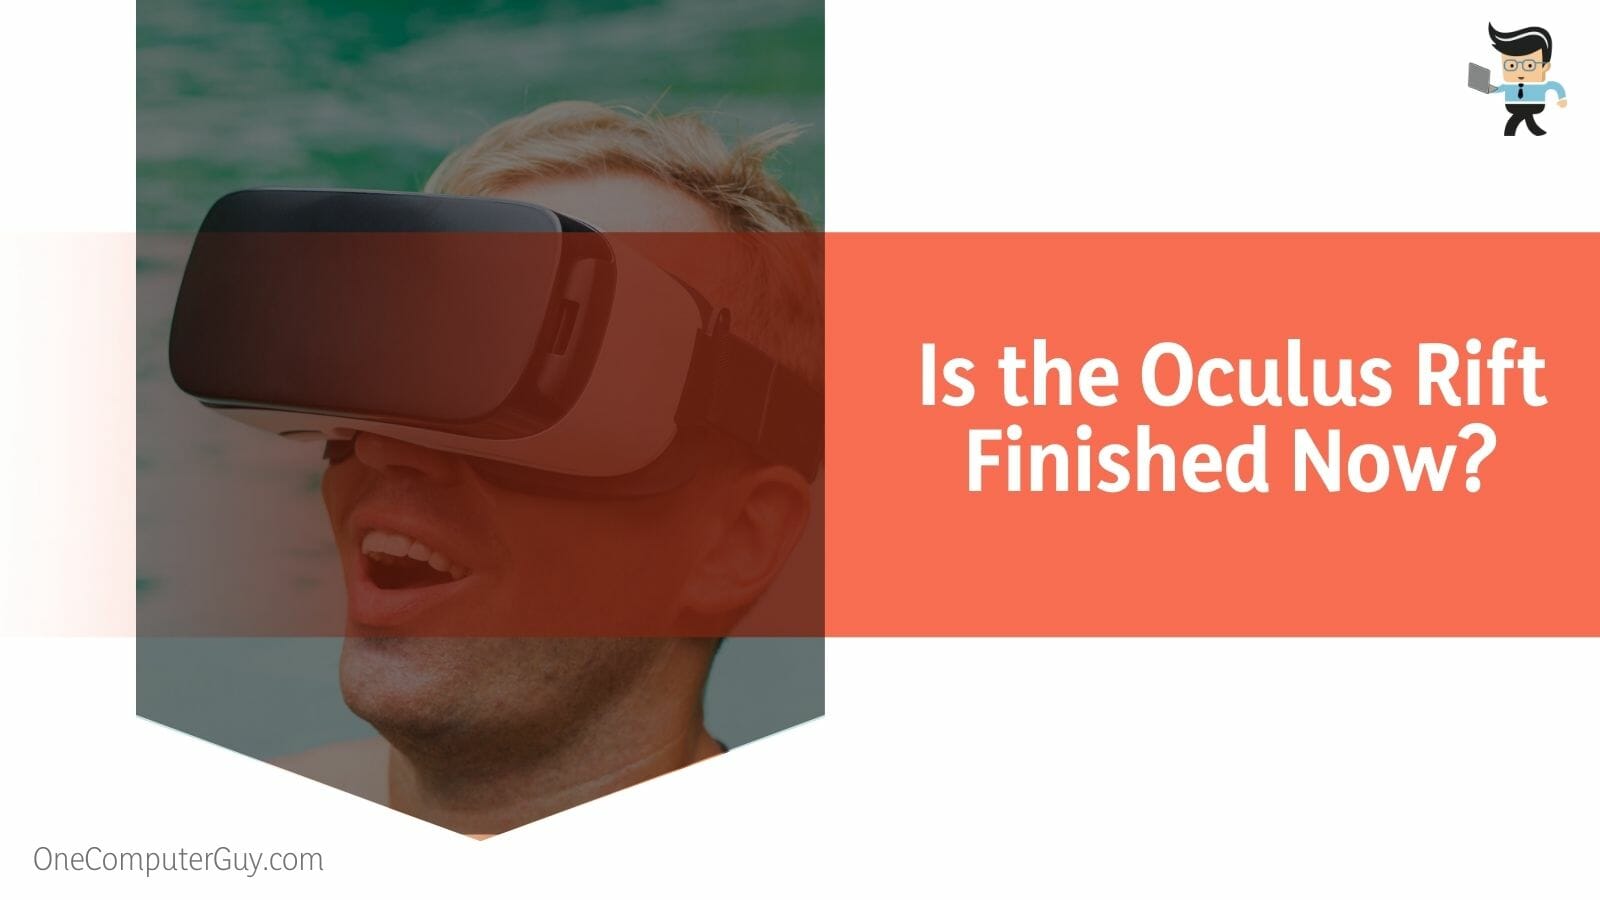 Is the Oculus Rift Finished Now